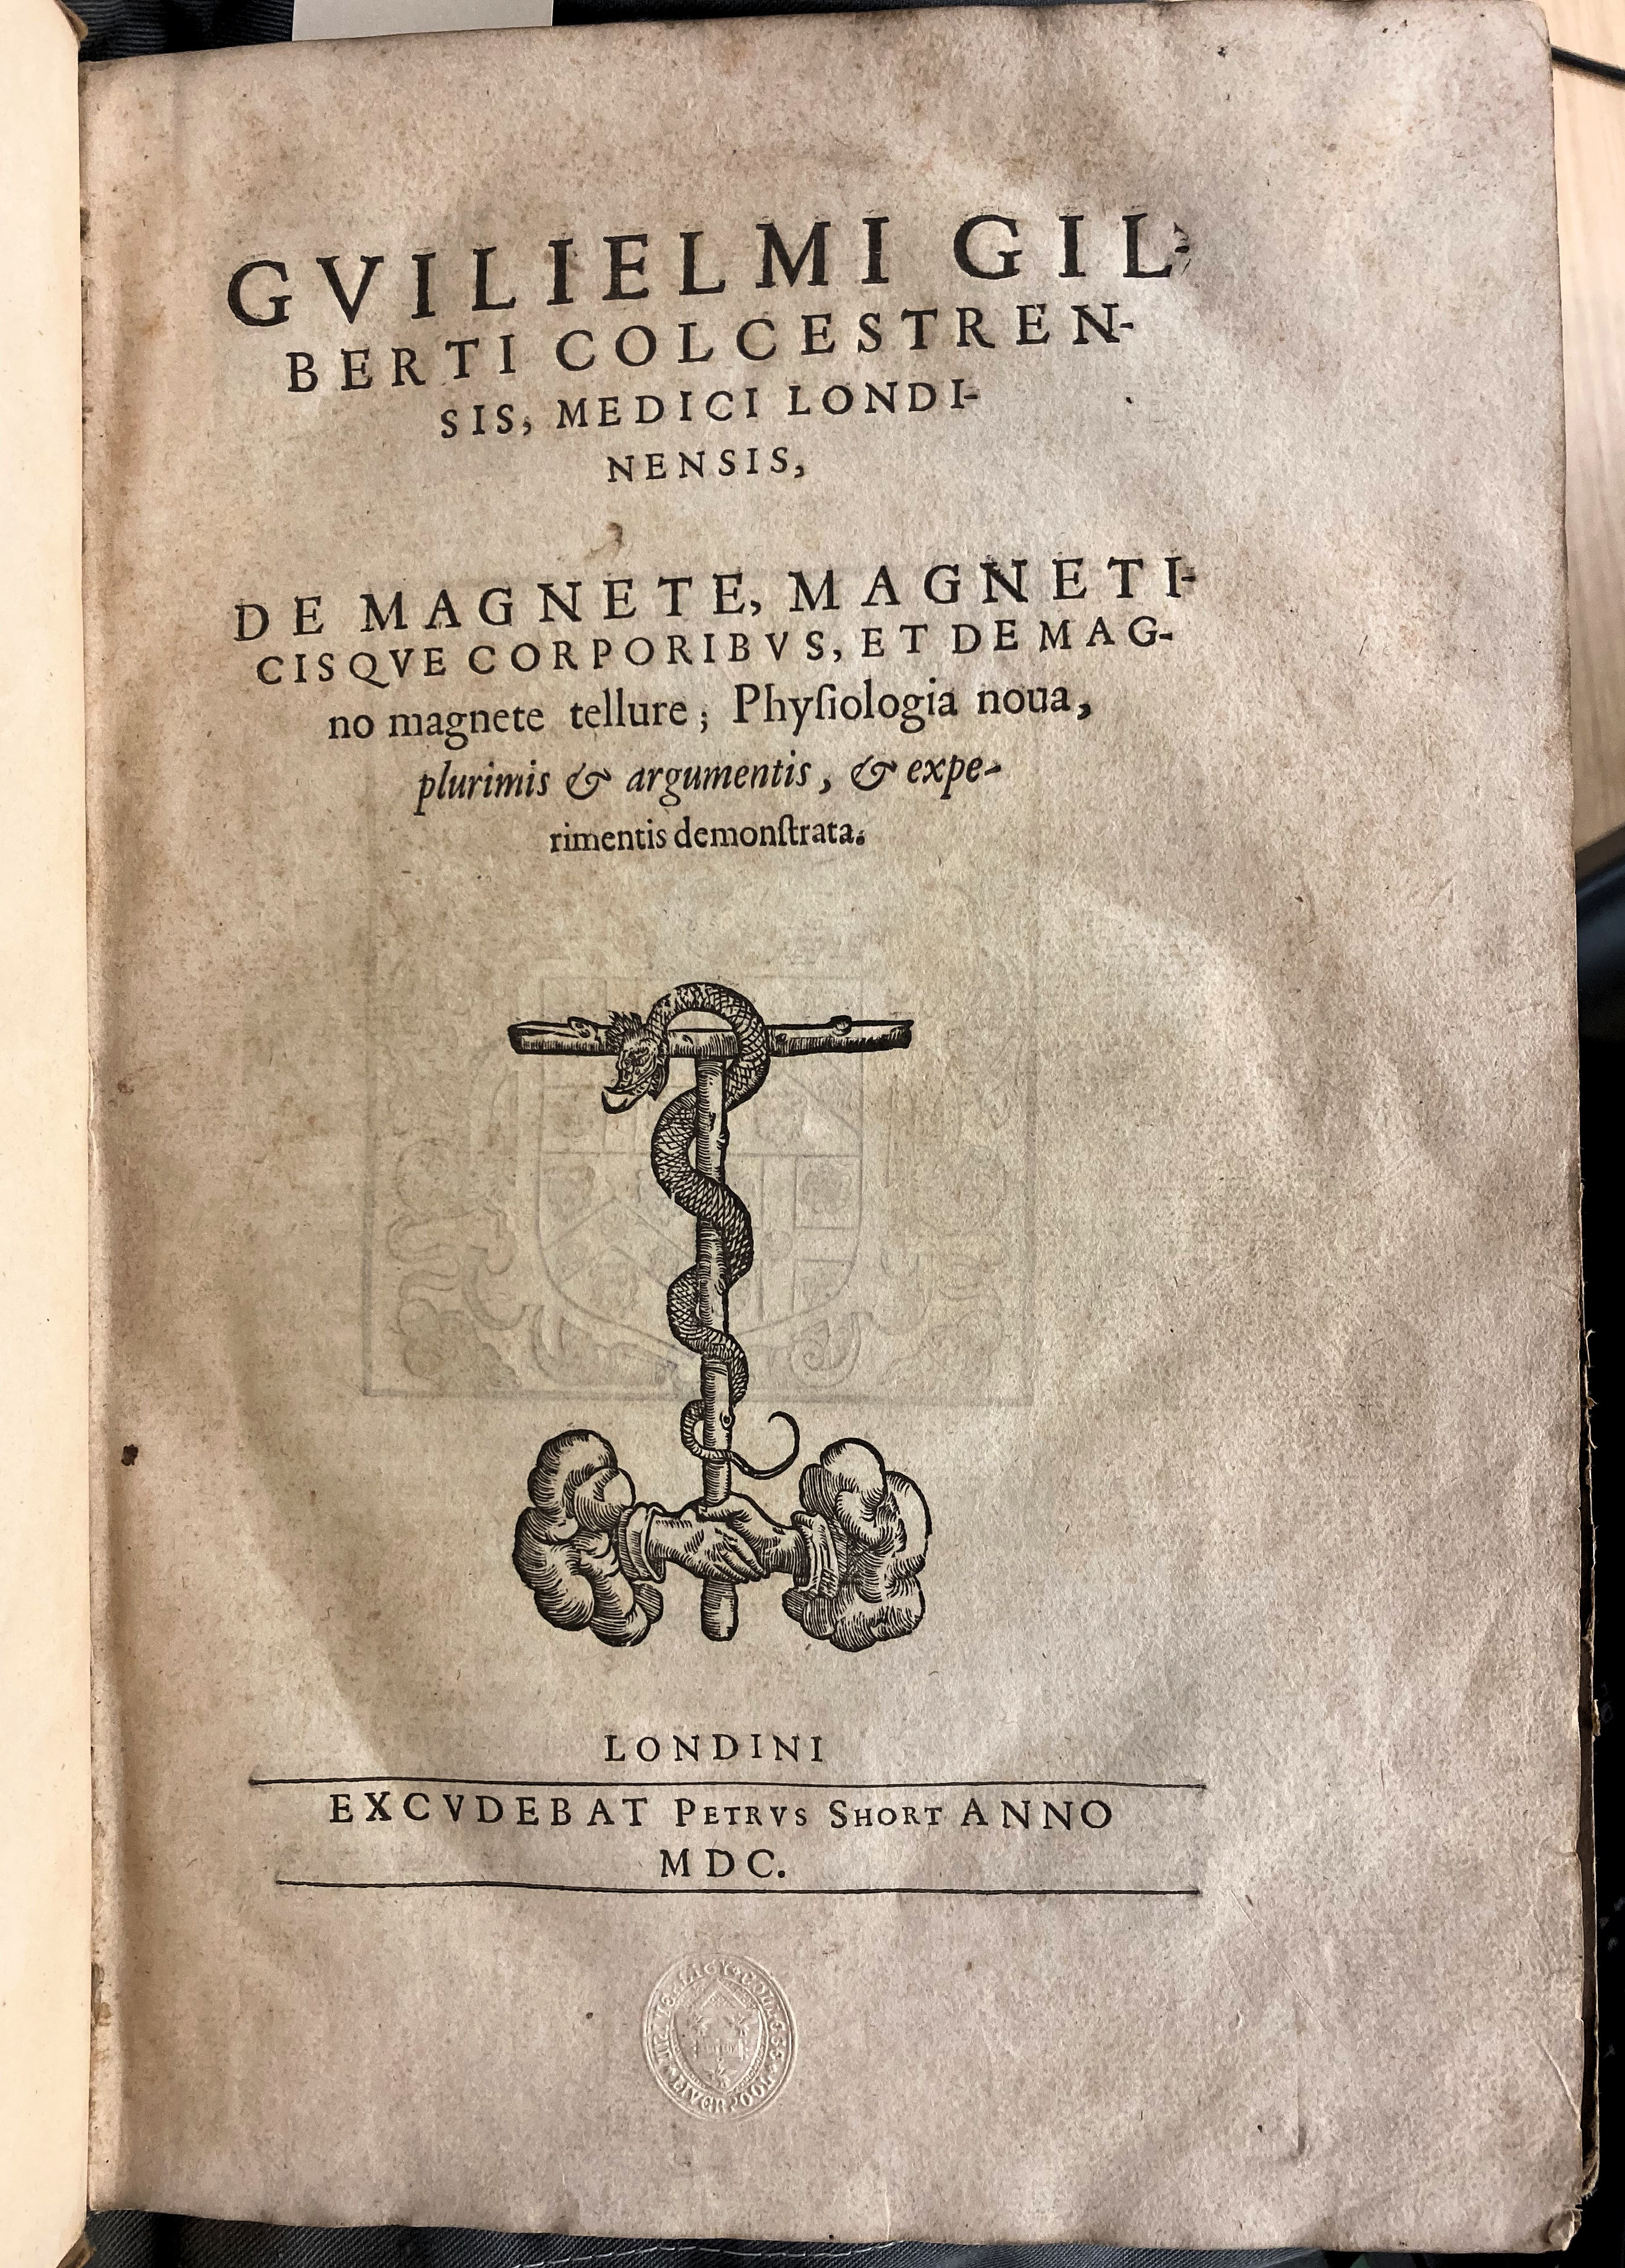 SCA on "This #TudorTuesday moves from music magnets: William Gilbert's De magnete (1600) founded the new science of magnetism, vital for contemporary advances in navigation. Our copy (SPEC H19.02B)